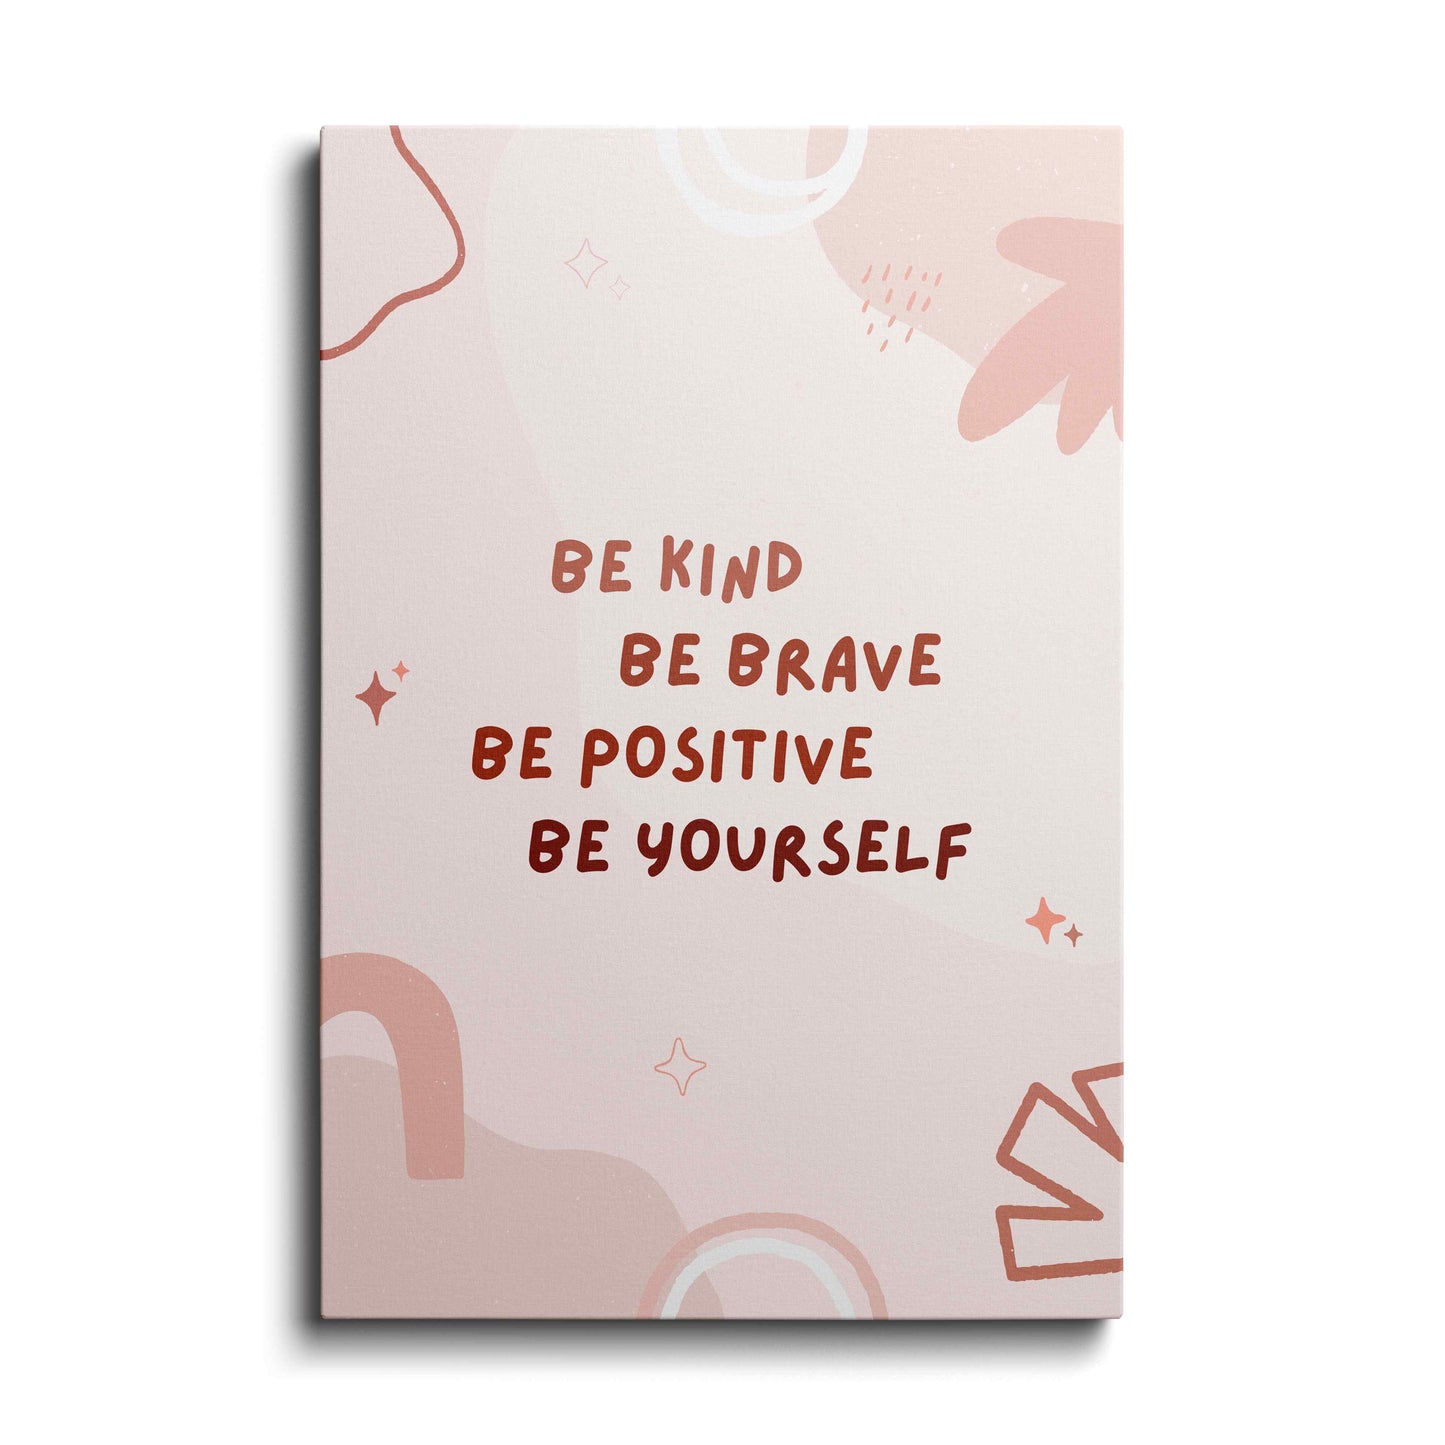 Be Kind, Brave, Positive, Yourself---